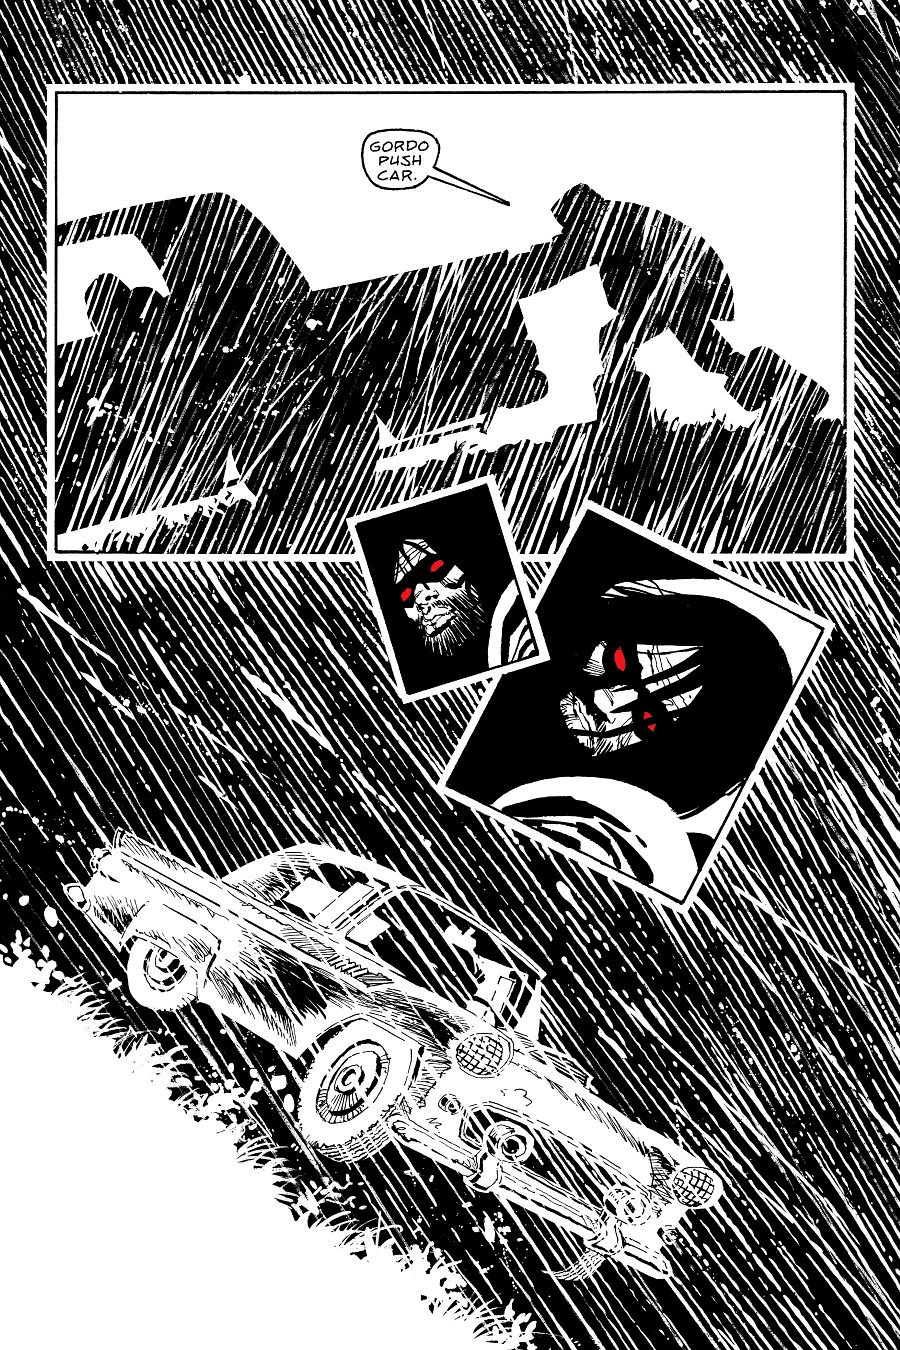 page 183 of sin city 7 hell and back